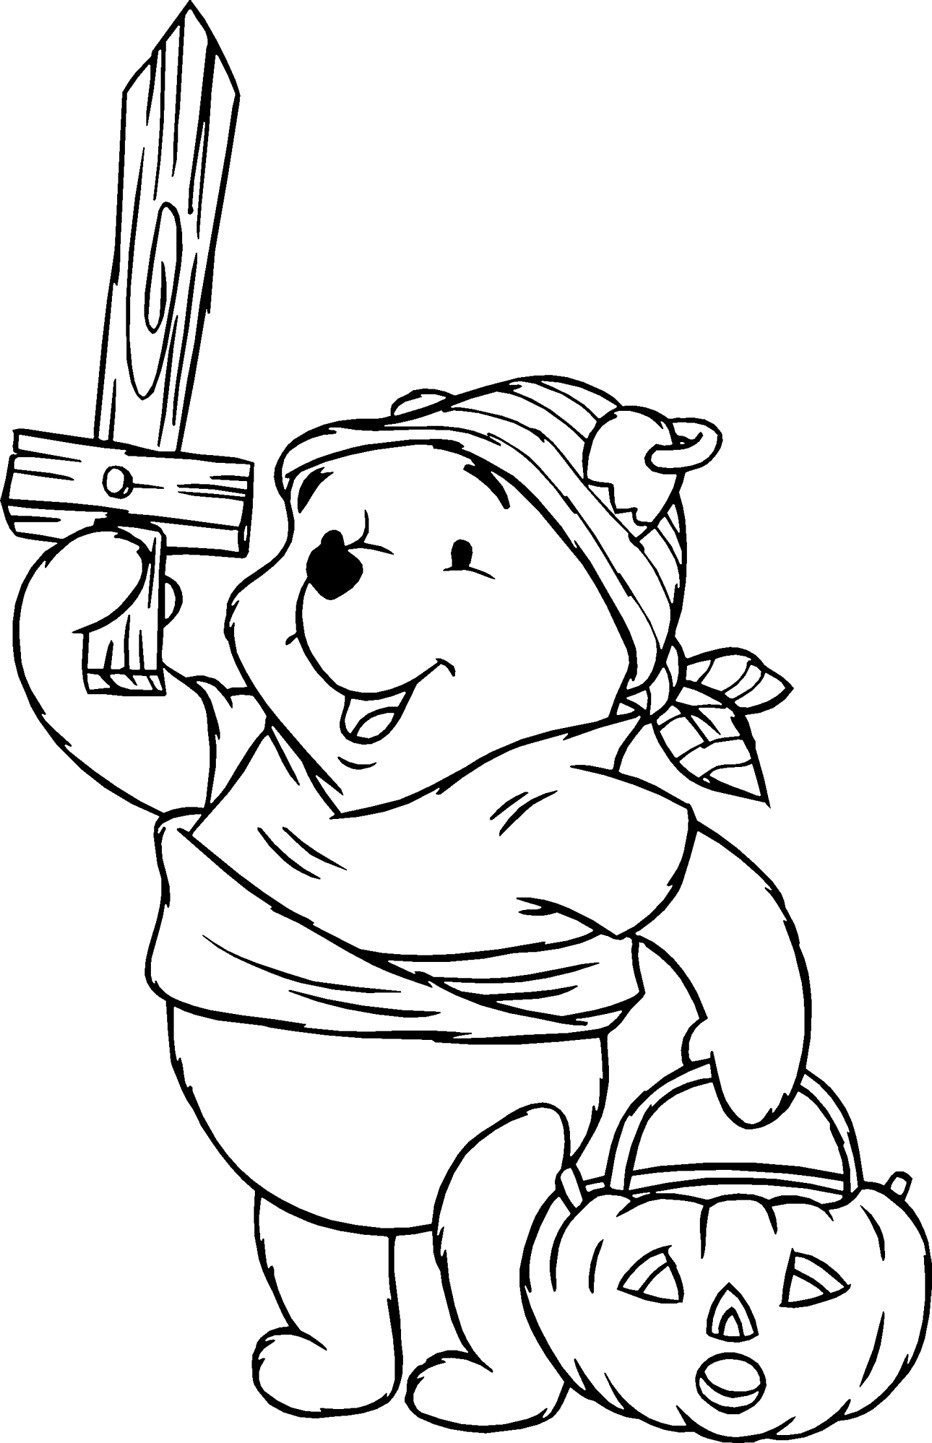 Kids Coloring Print
 Free Printable Winnie The Pooh Coloring Pages For Kids